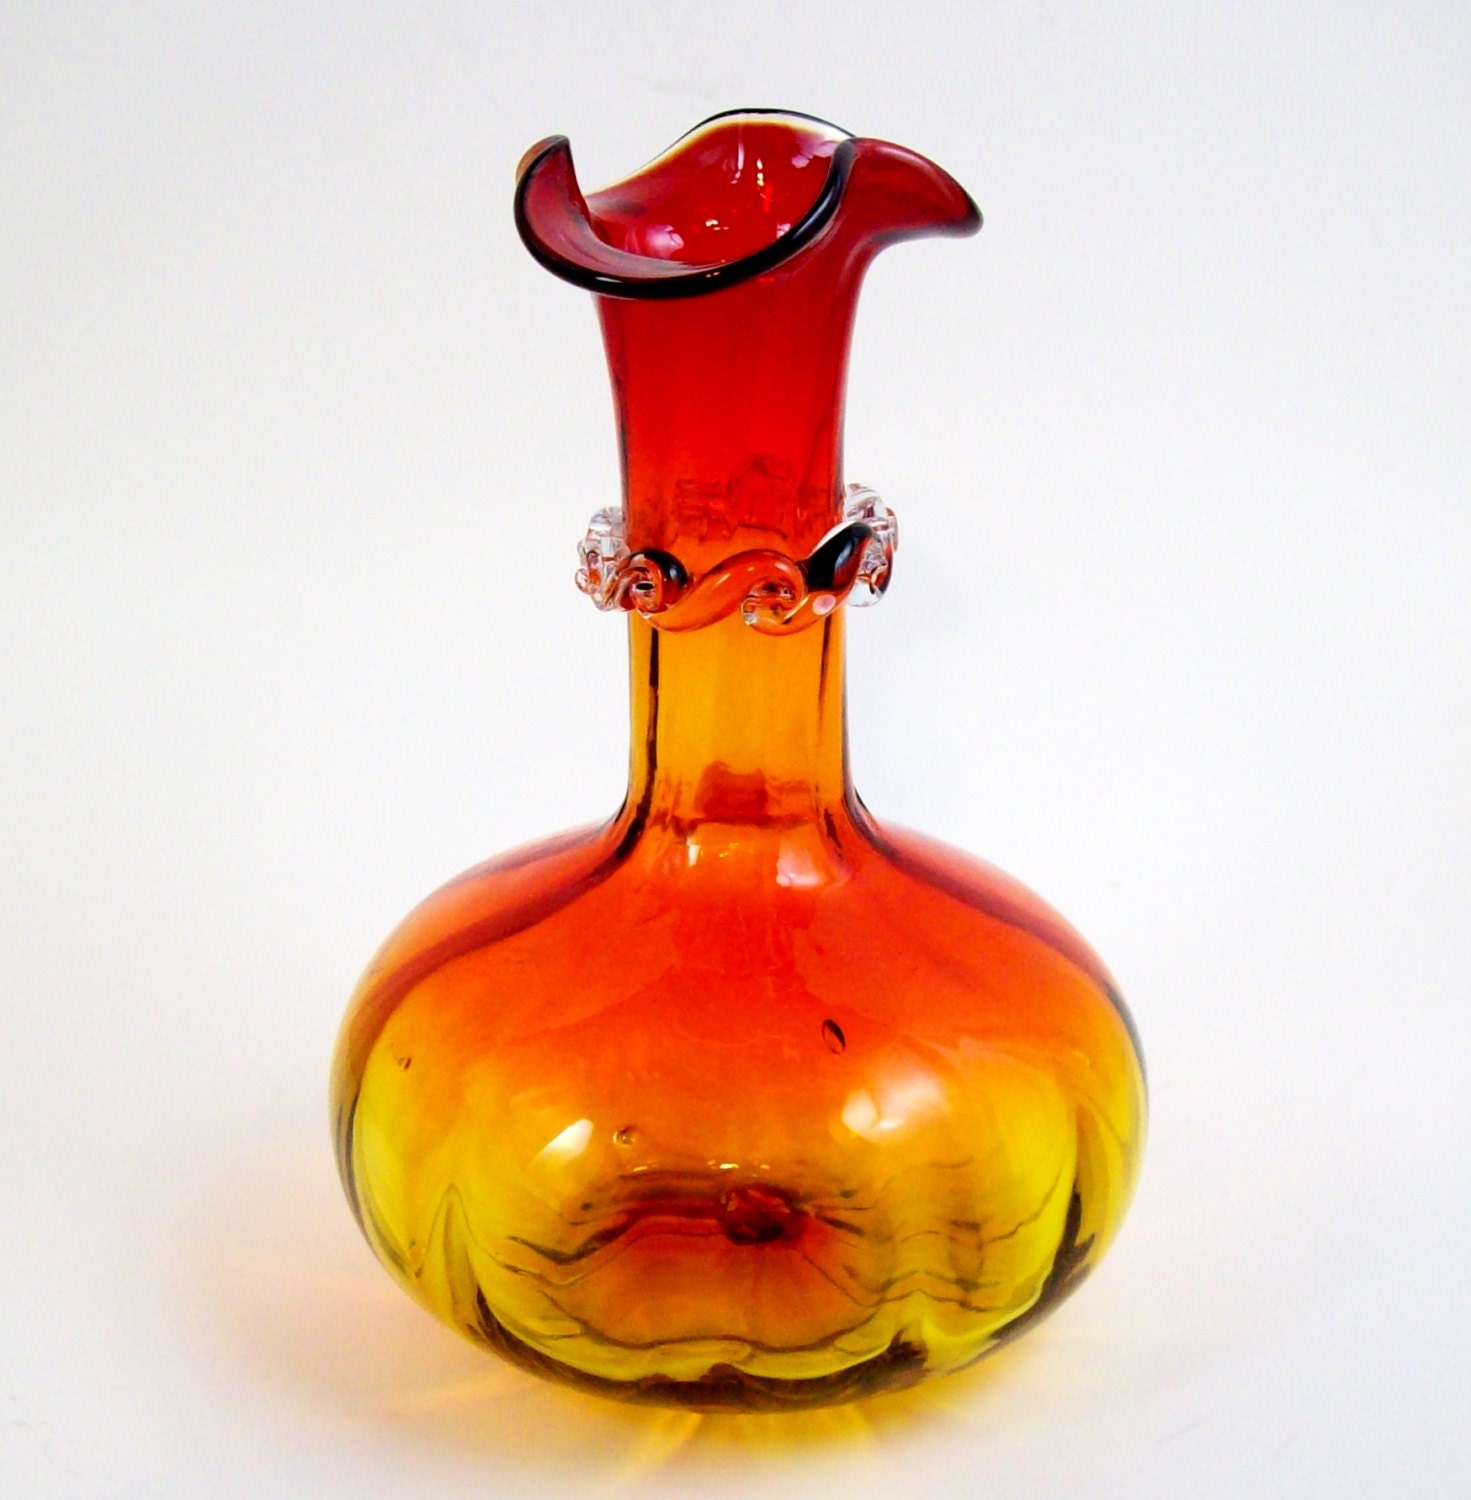 Vintage Amberina Art Glass Vase Red And Yellow Melon Shape